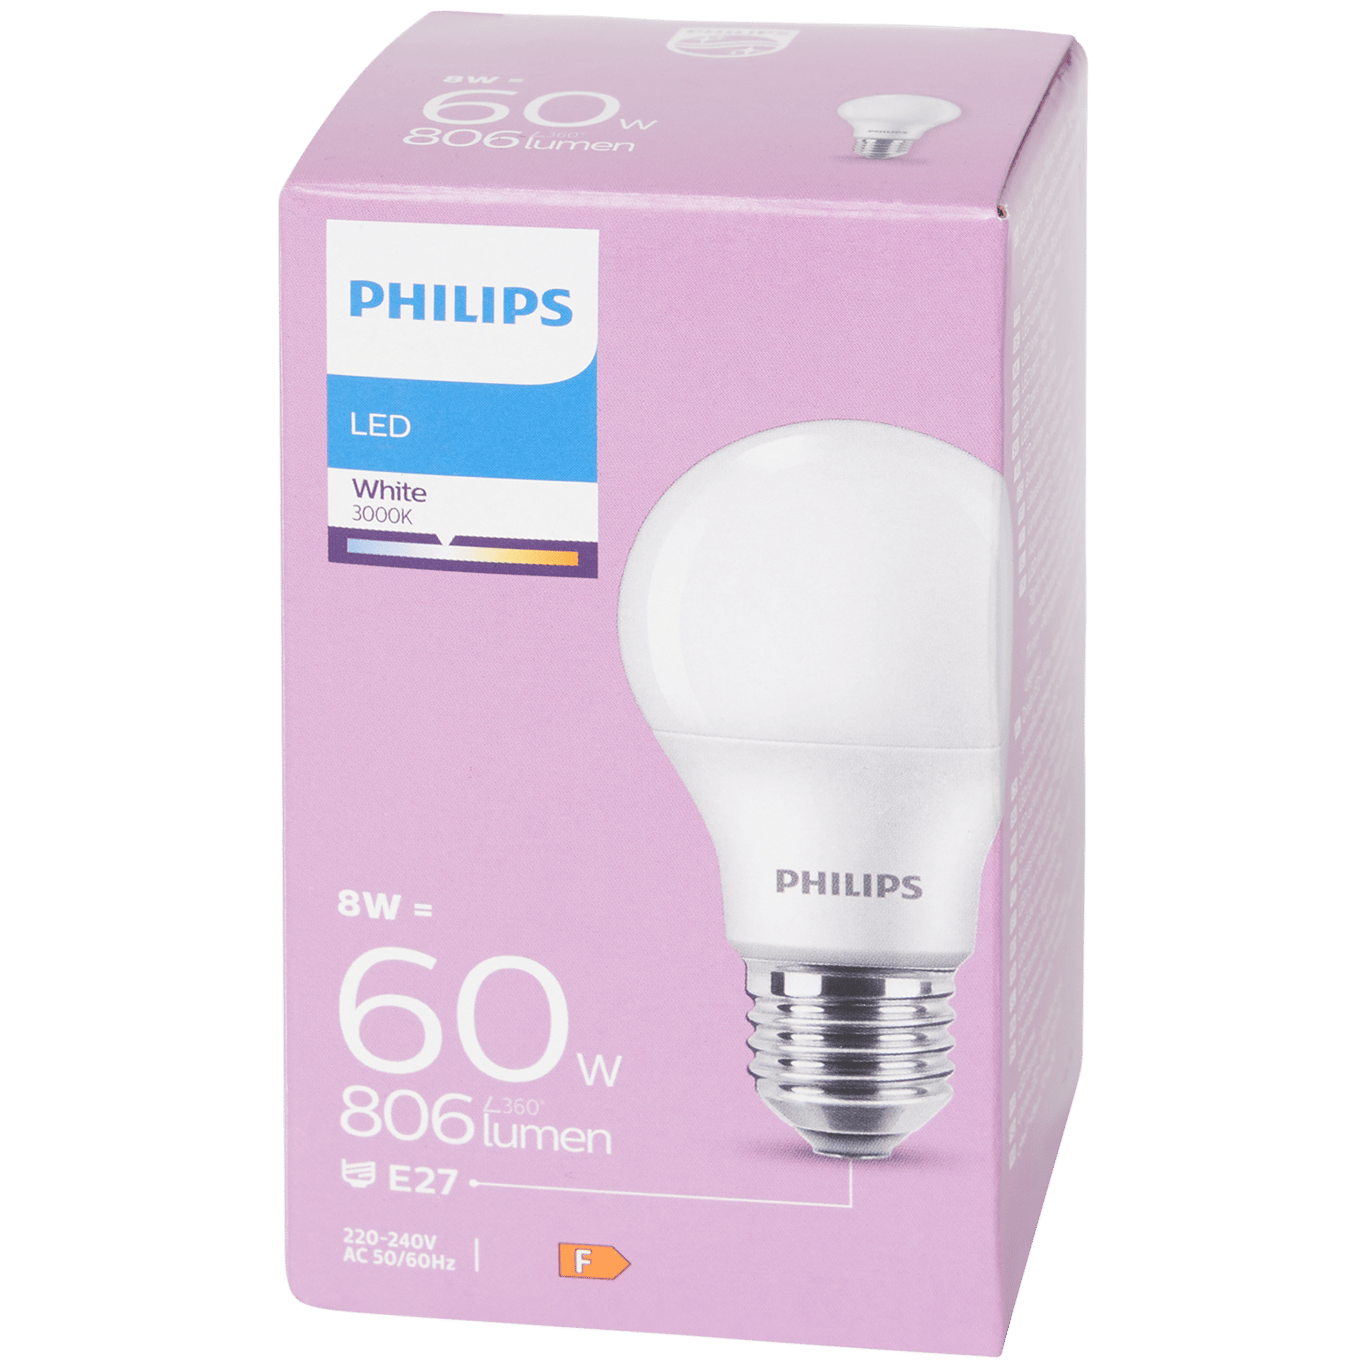 Philips LED-Lampe in Kugelform